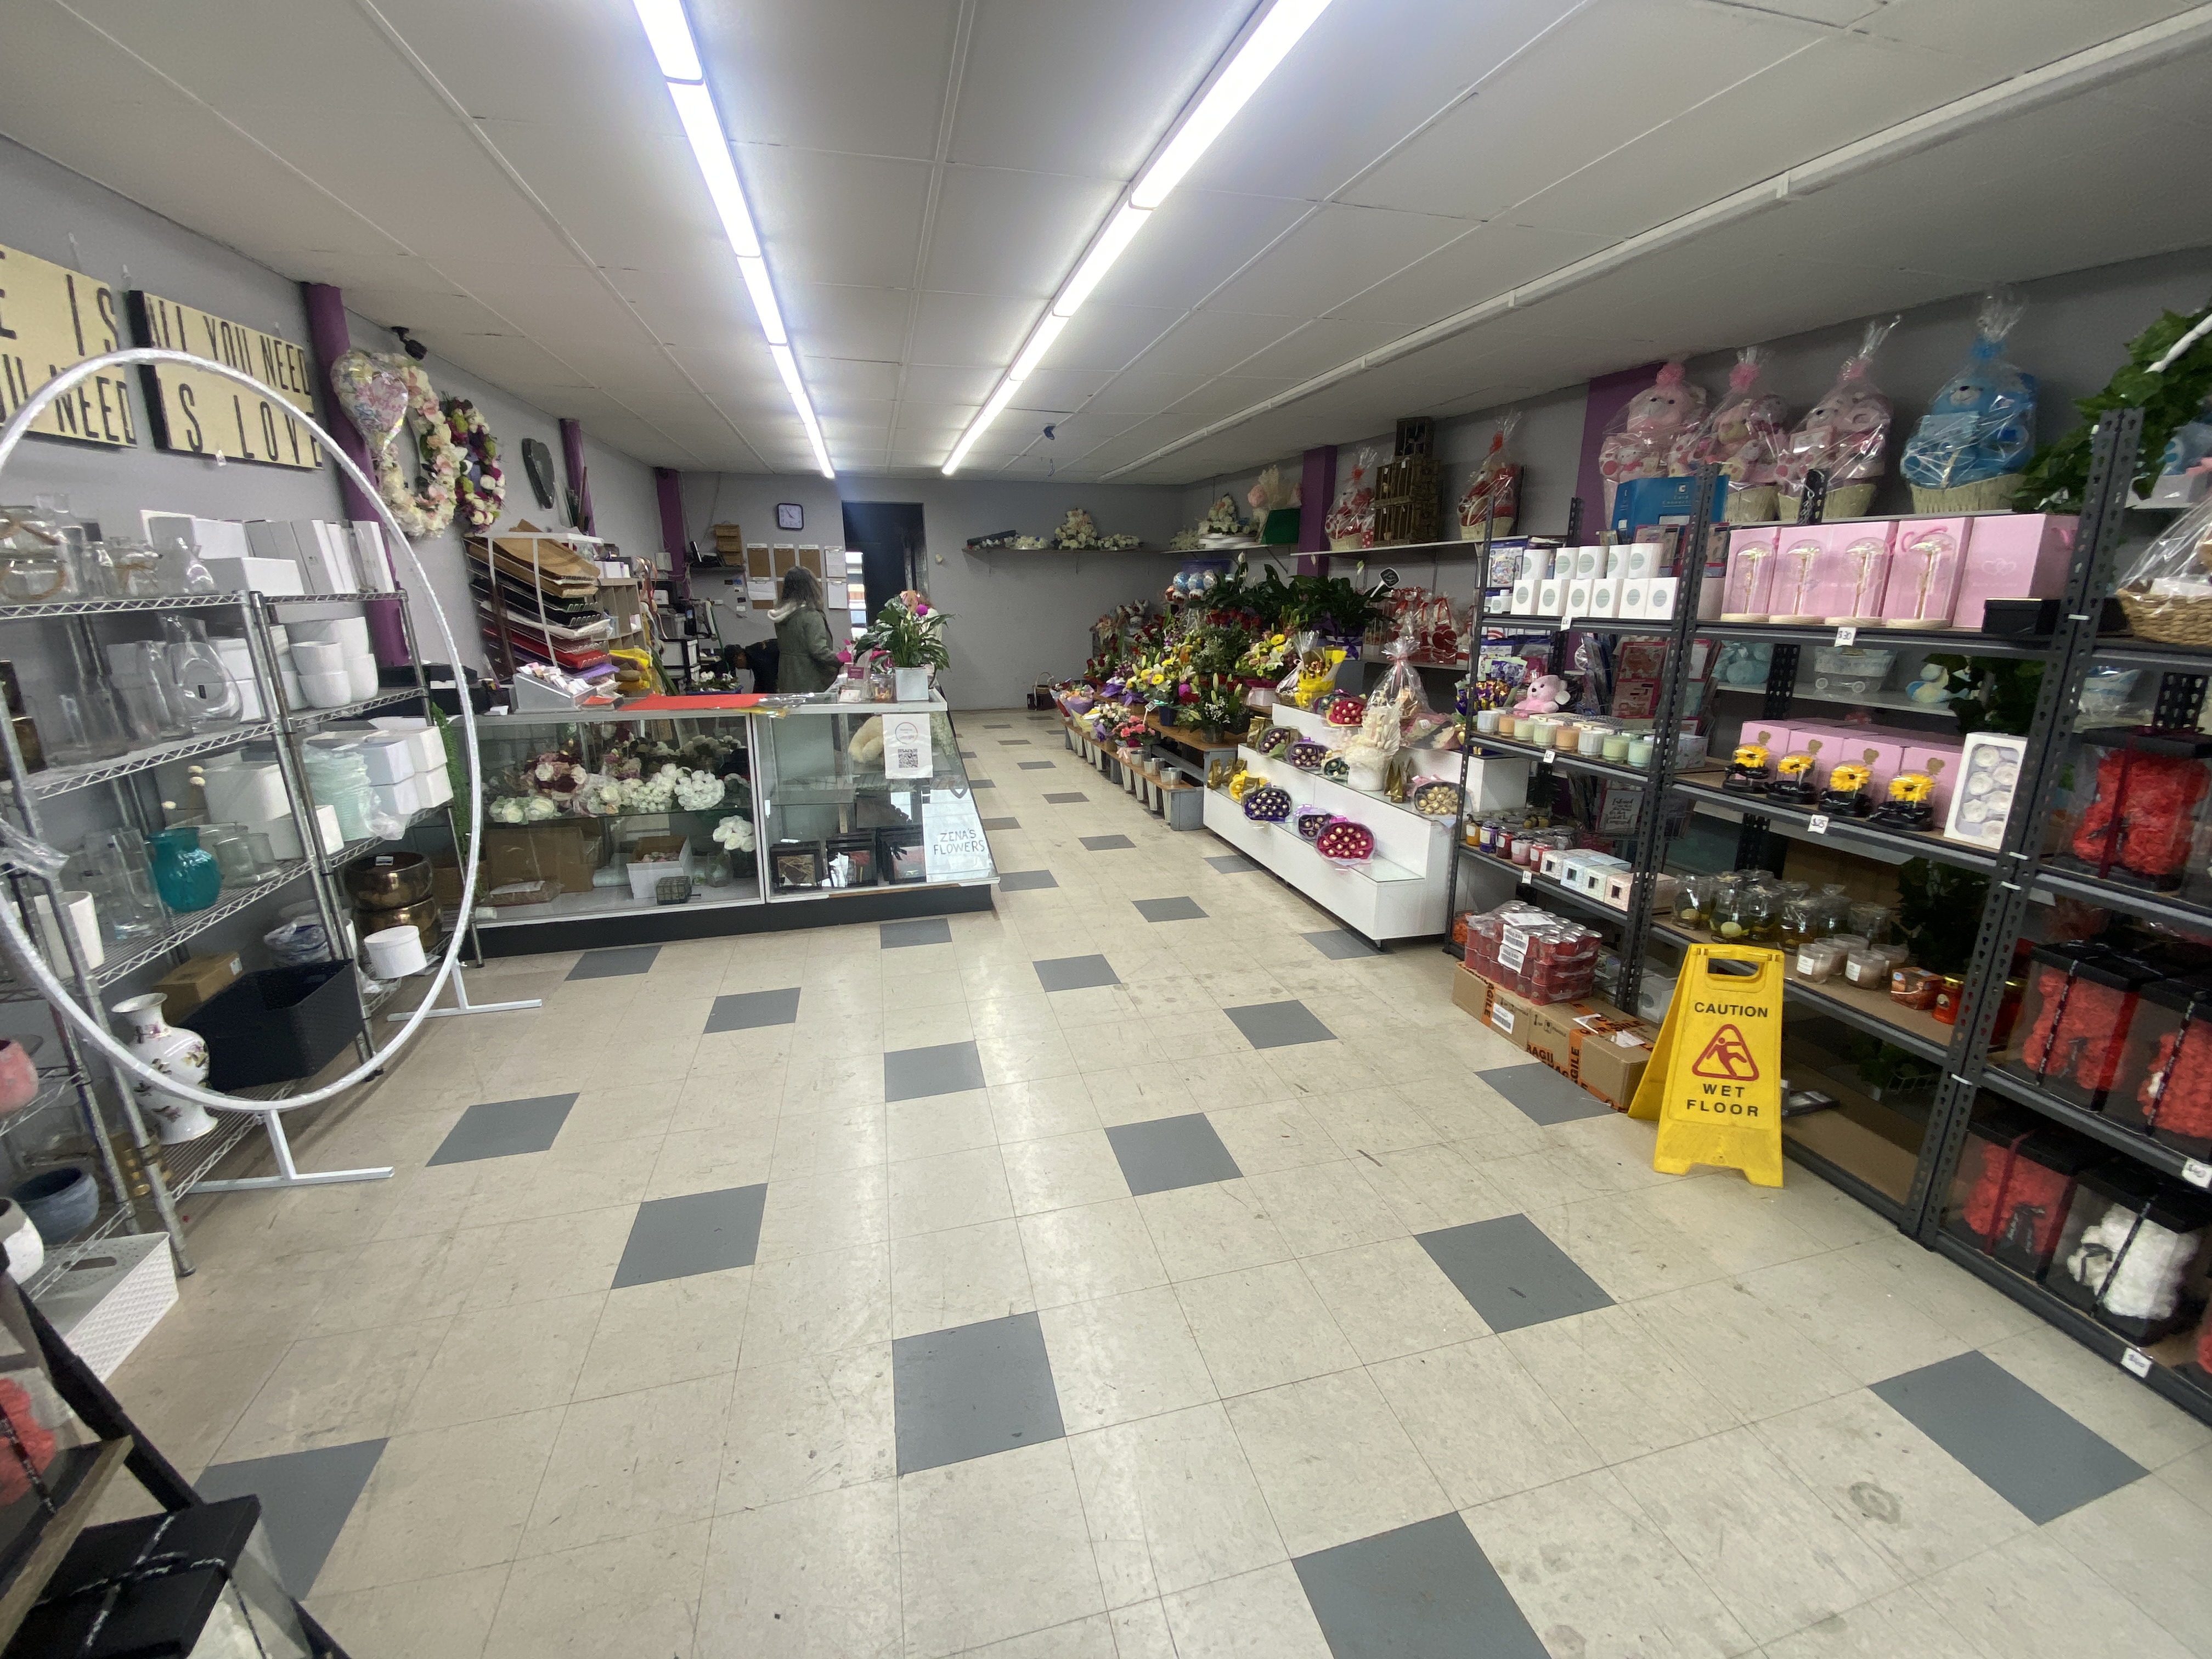 Retail property for lease in liverpool 1